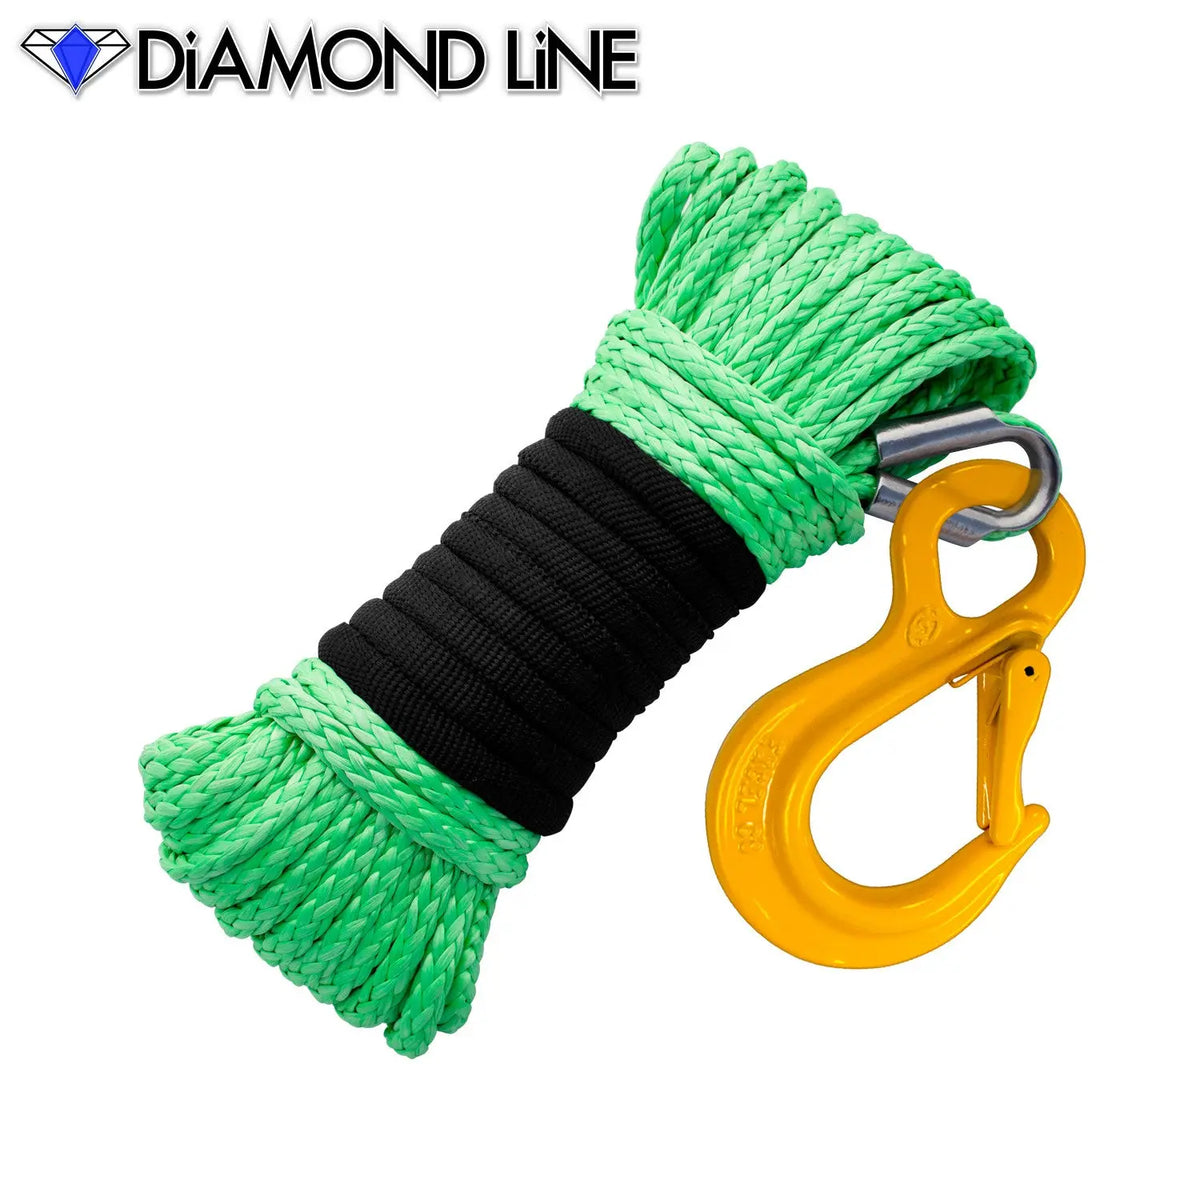 3/16" x 50' Diamond Line Winch Rope Mainline - Bright Green with Hook.